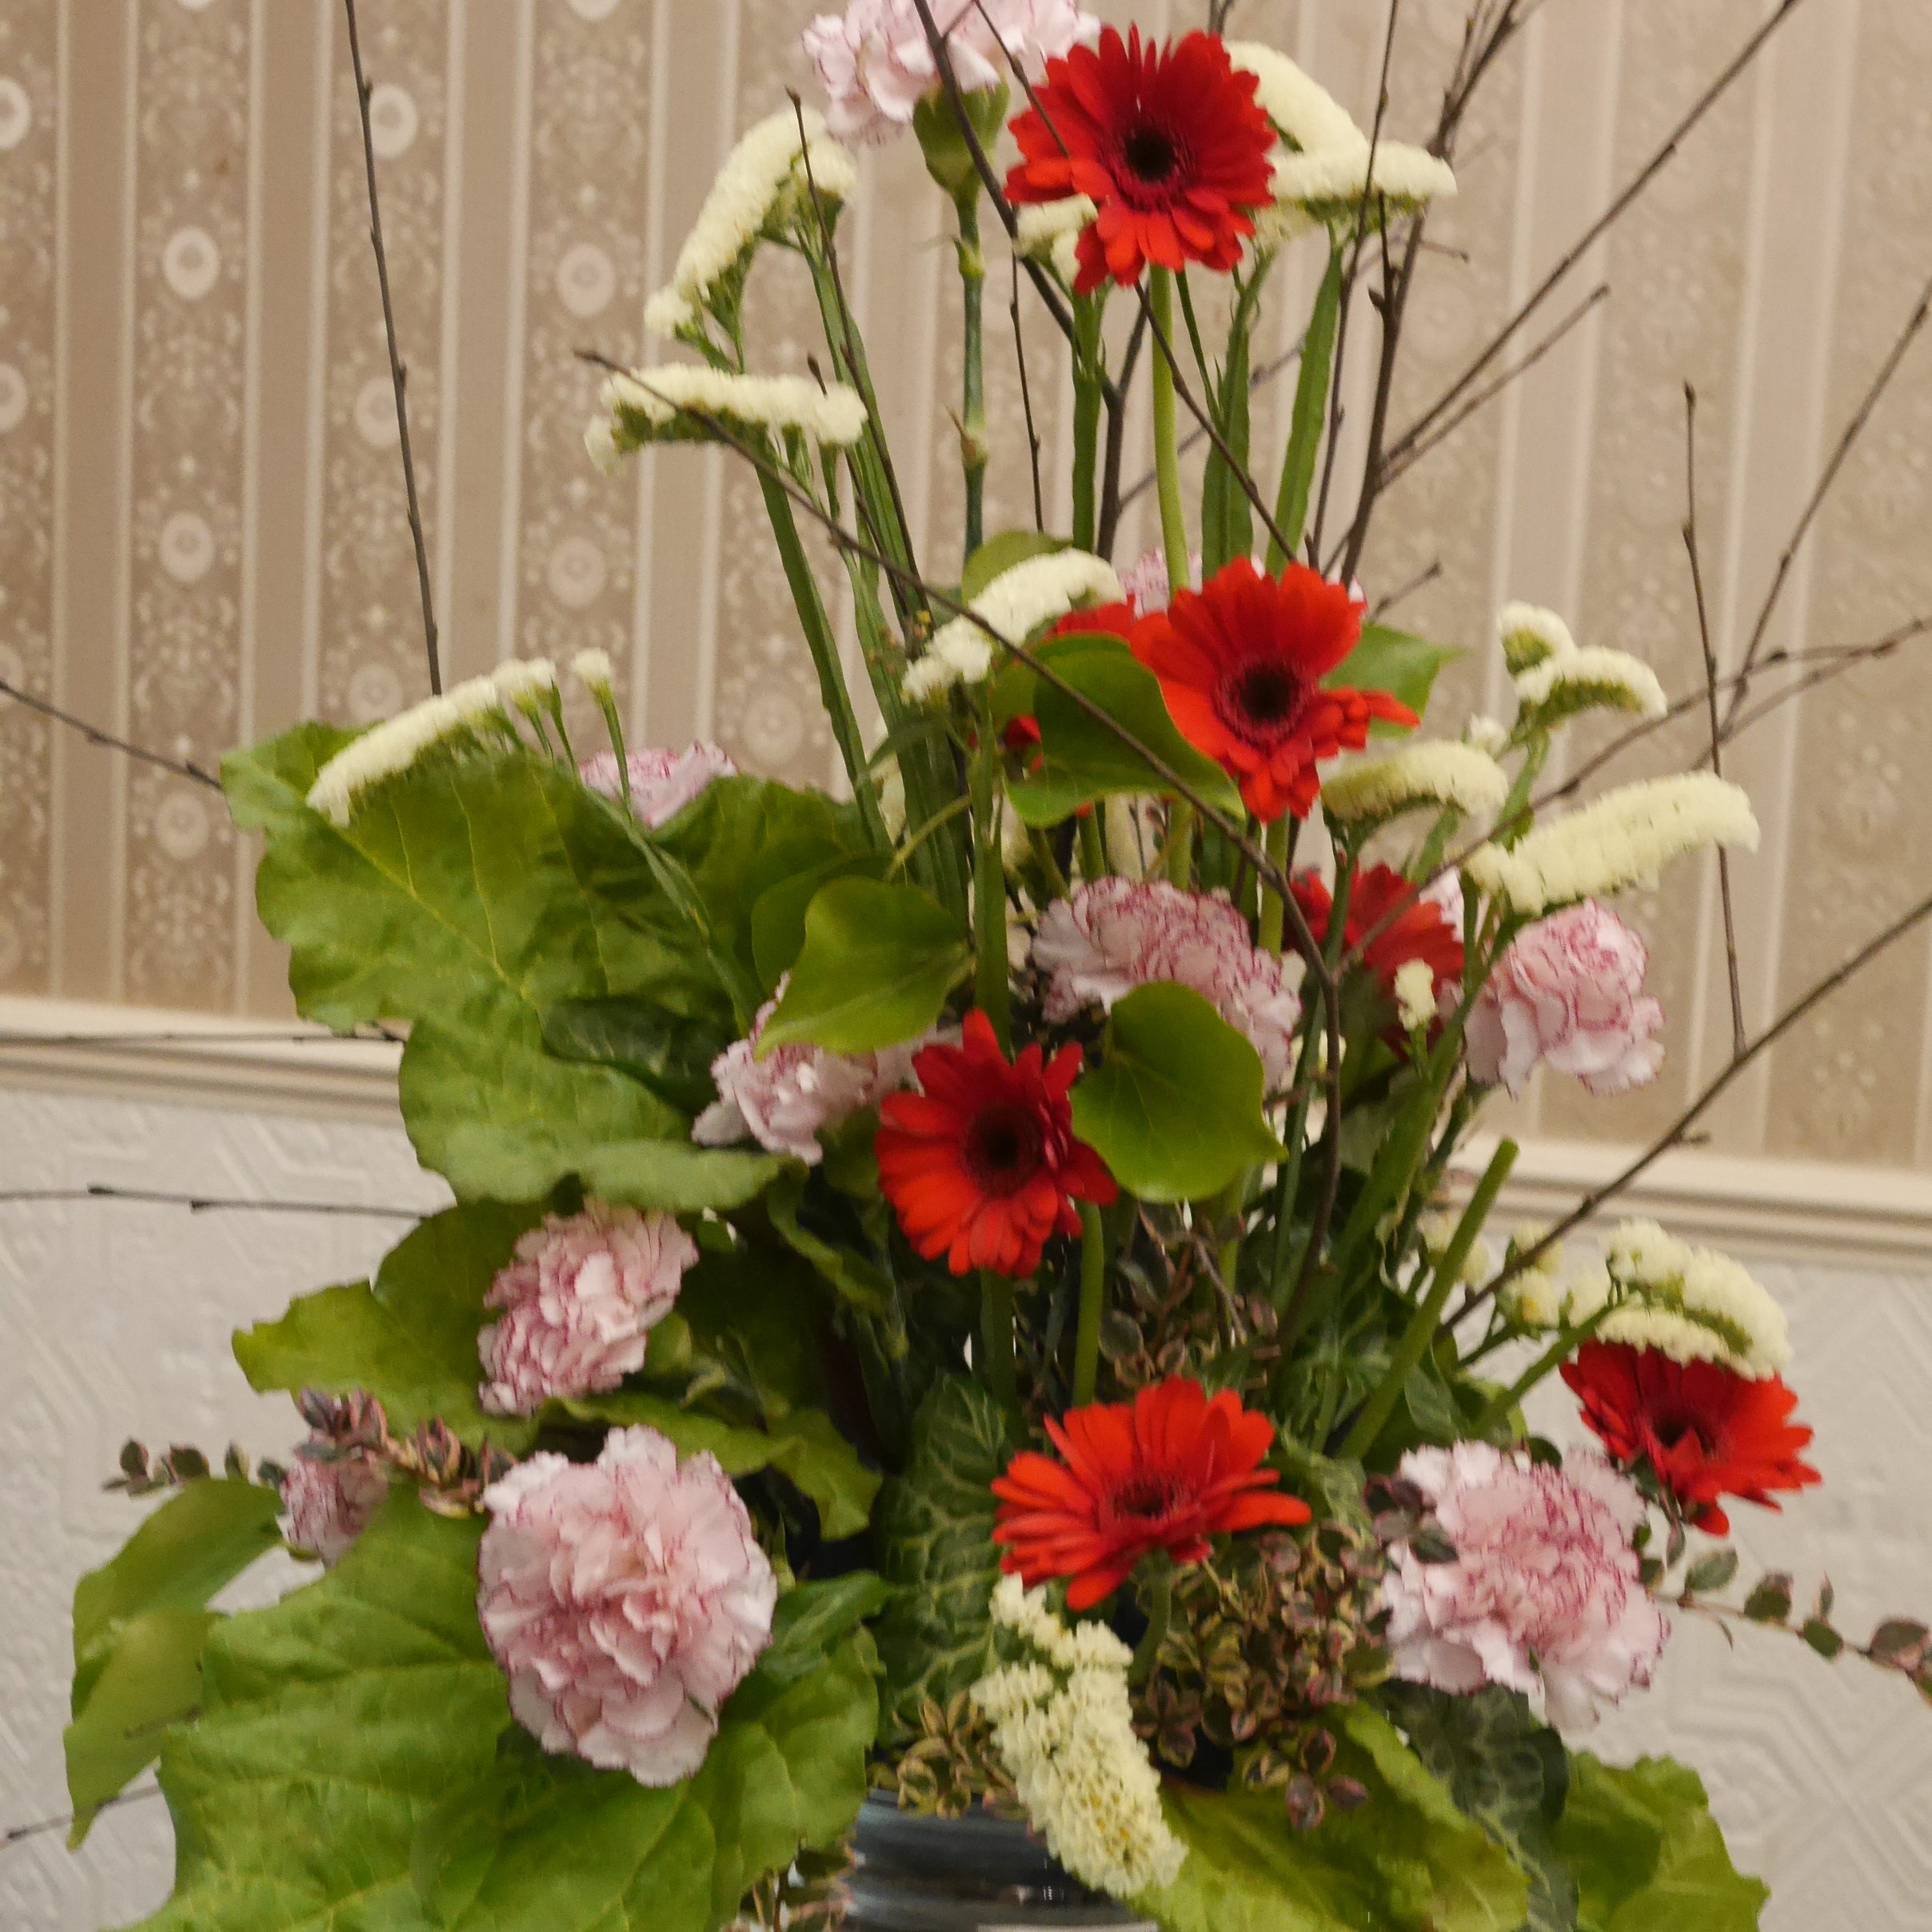 RHS Of Perthshire Floral Art Group March Meeting